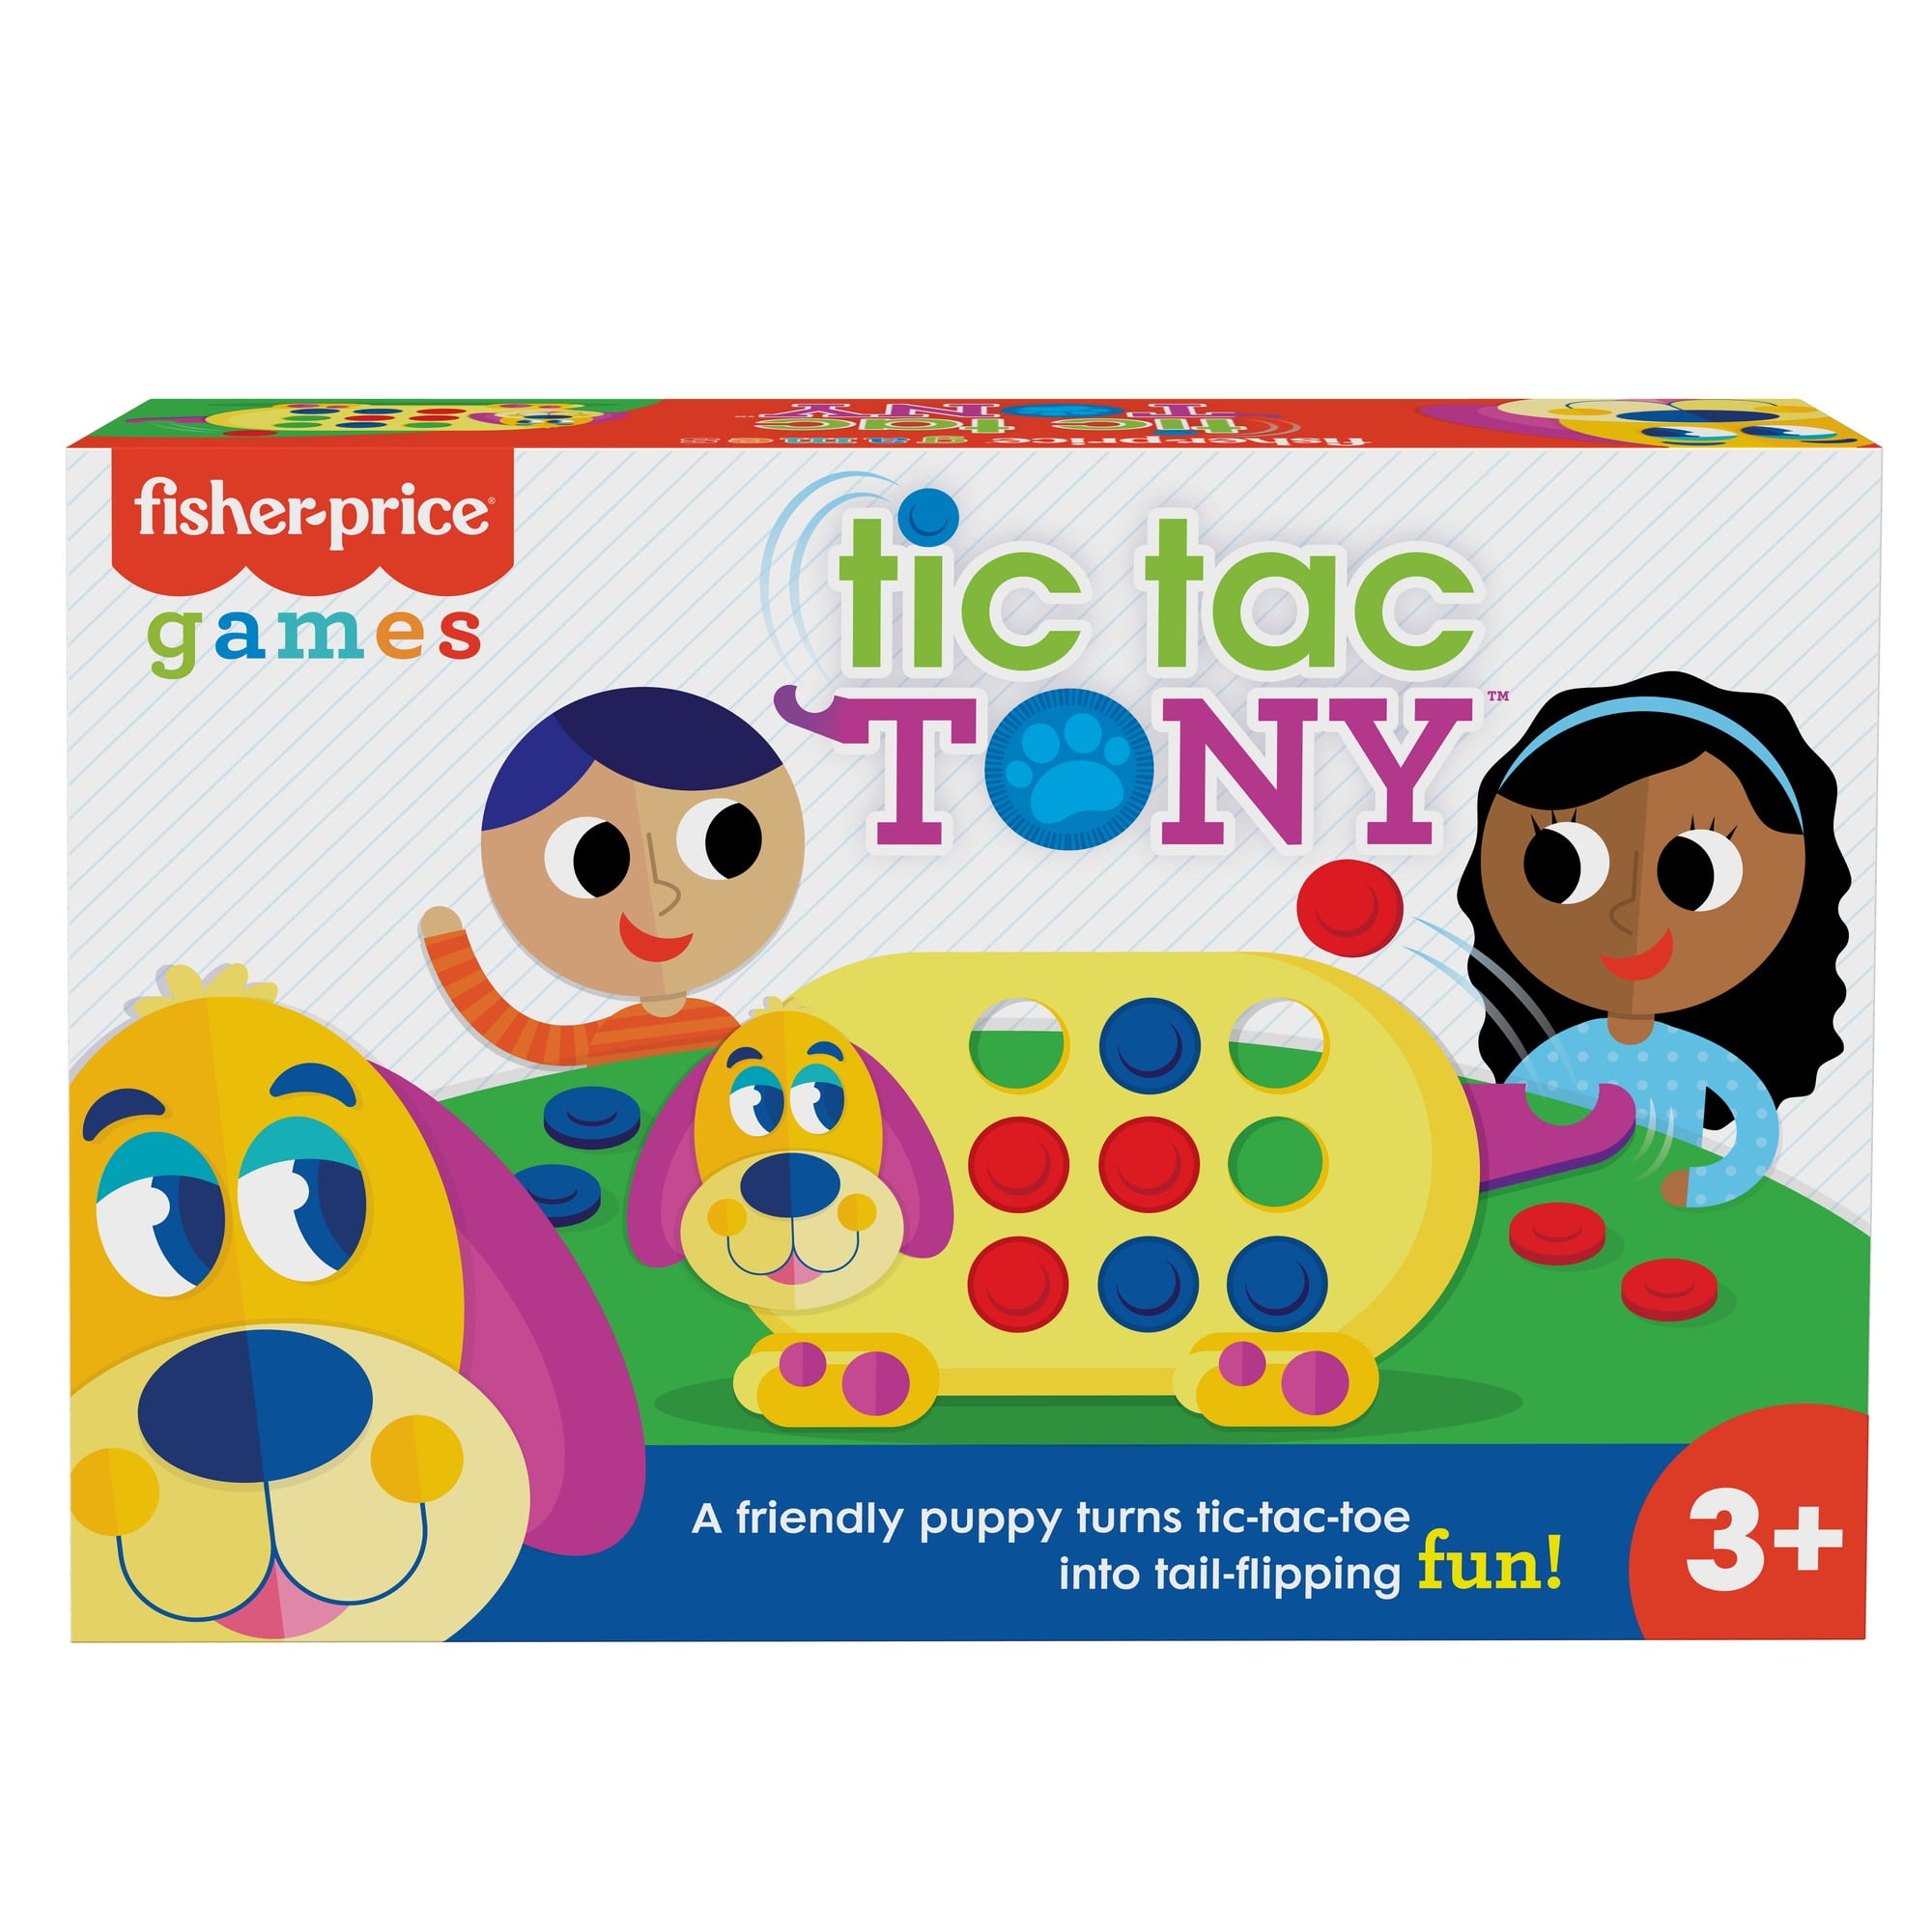 Preschool Champion-Children Love This Early Educational Fun Games For Smart Kids 